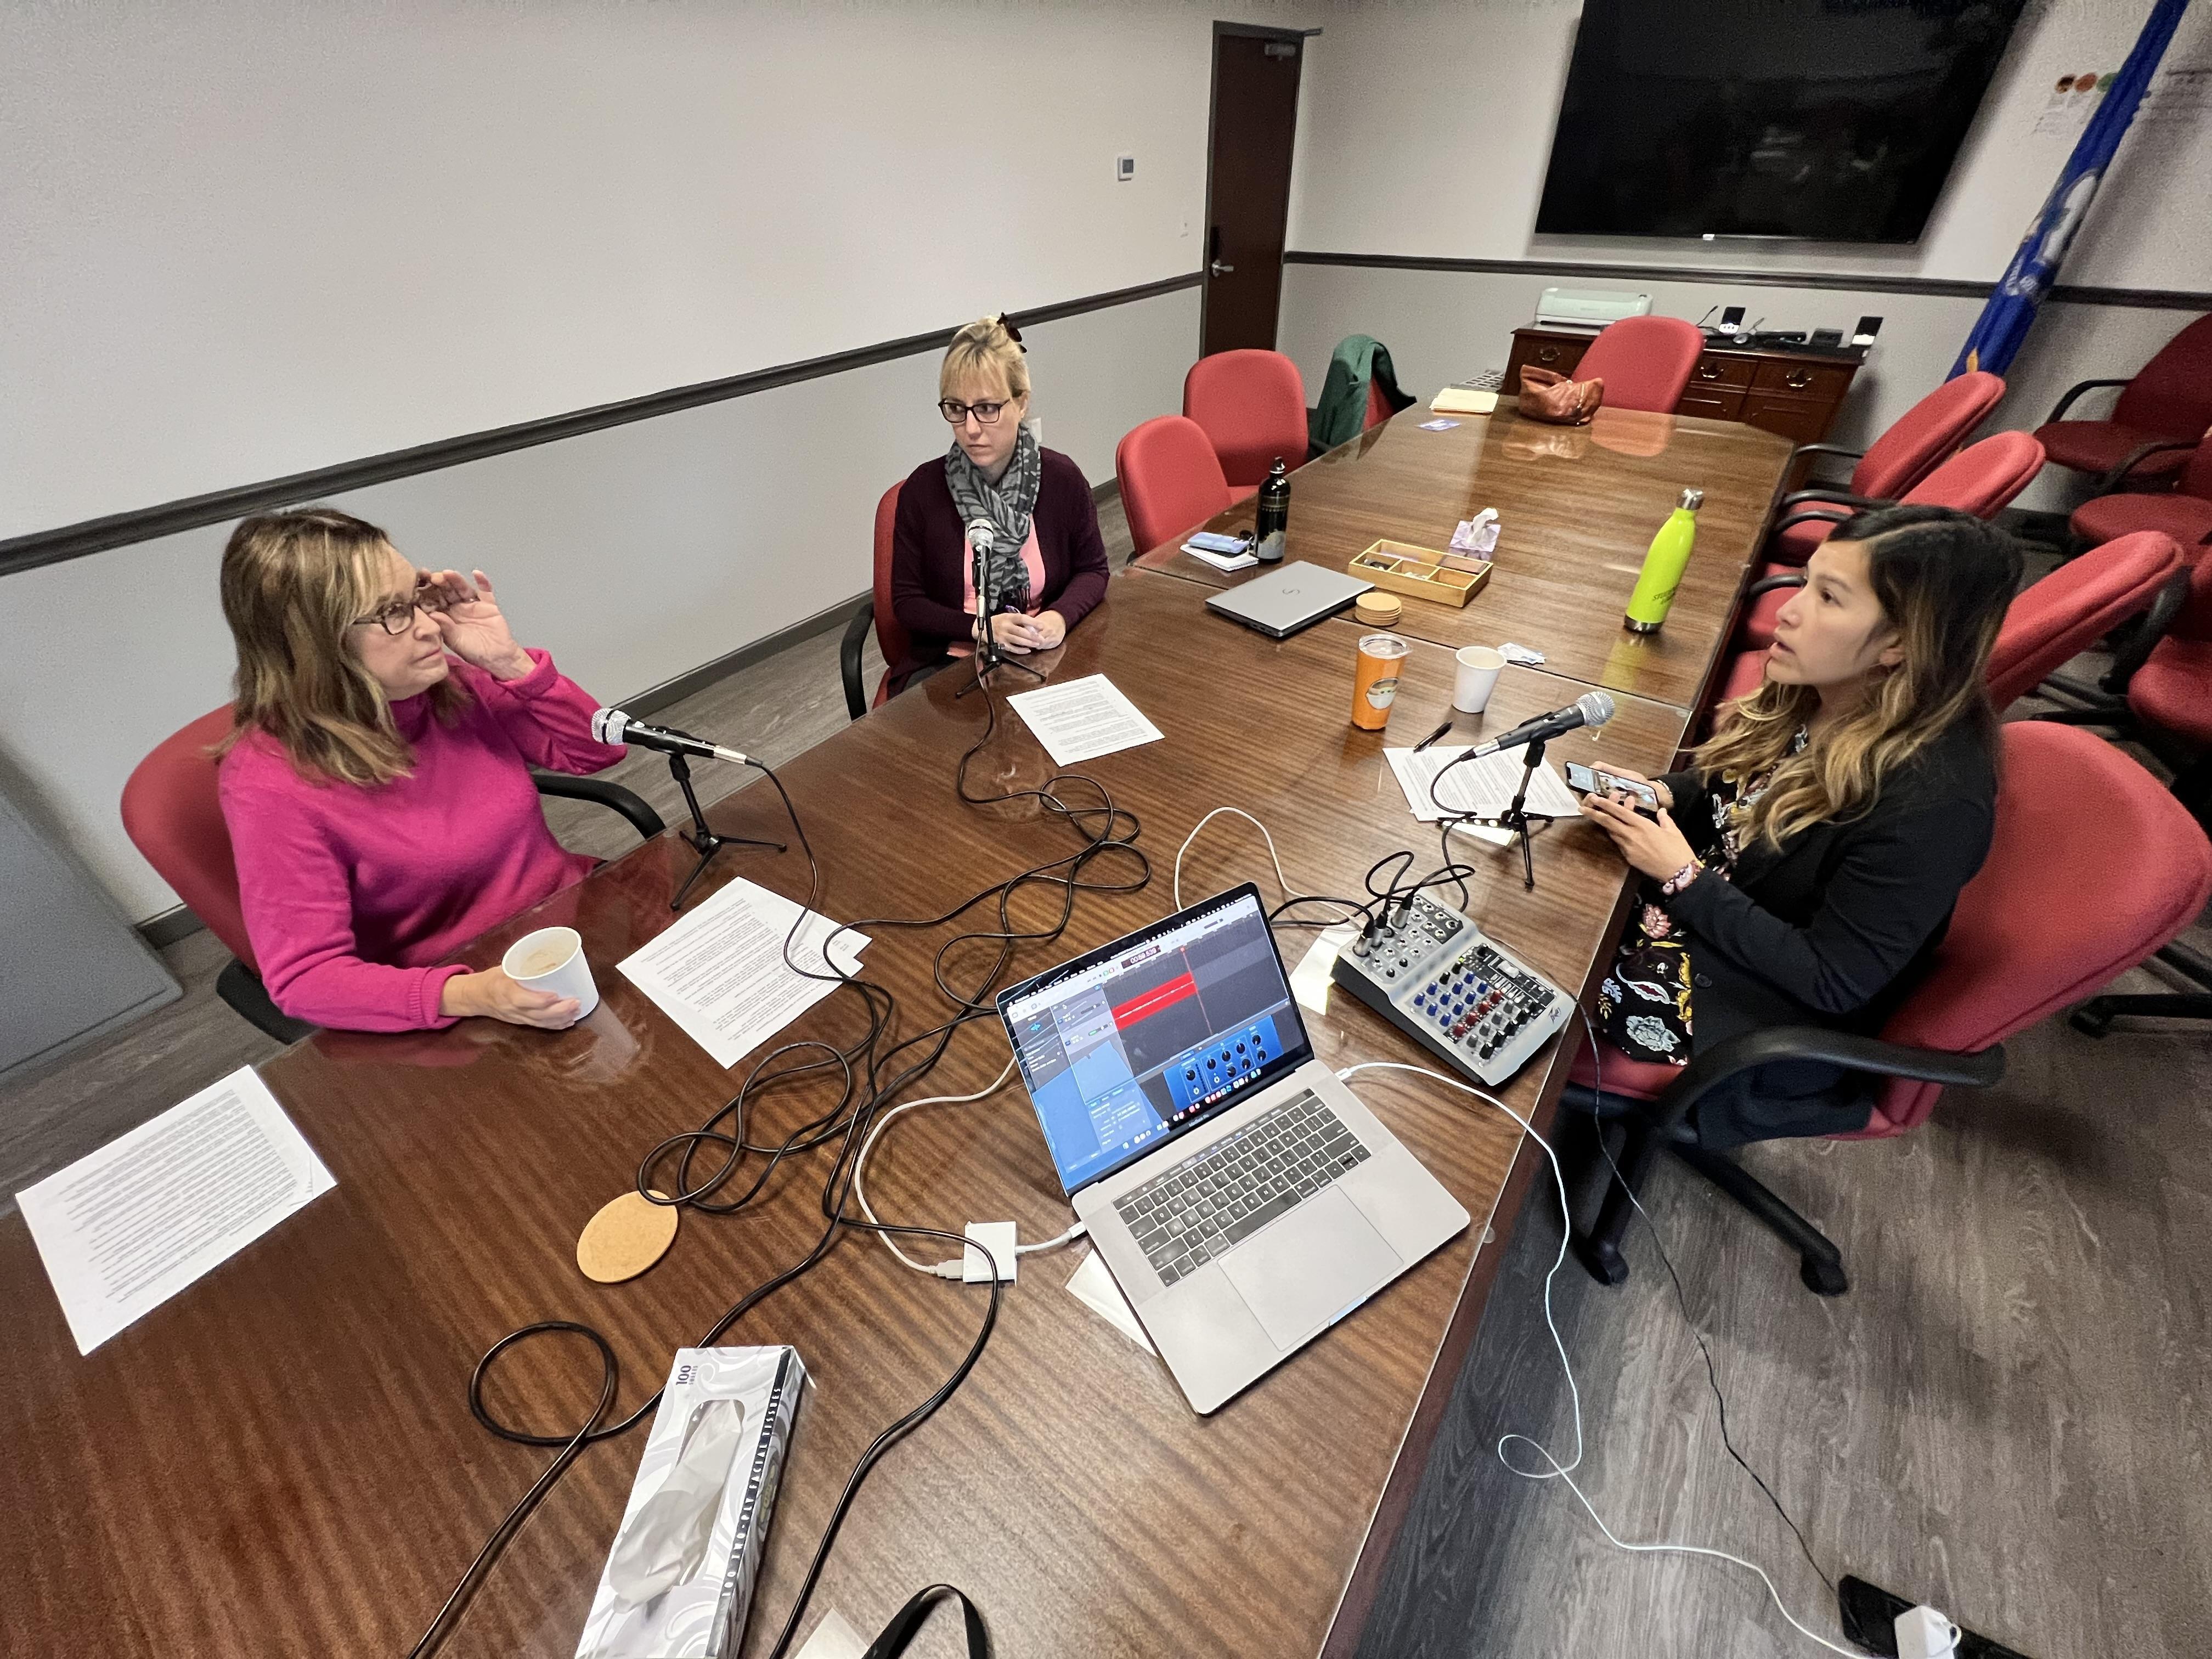 Former Secretary of the State Denise Merrill, left, records a podcast segment with Council 4 Communications Director Renne Hamel, right, and Communications Coordinator Lauren Takores about the early voting ballot measure in New Britain, Oct. 4, 2022. Phot